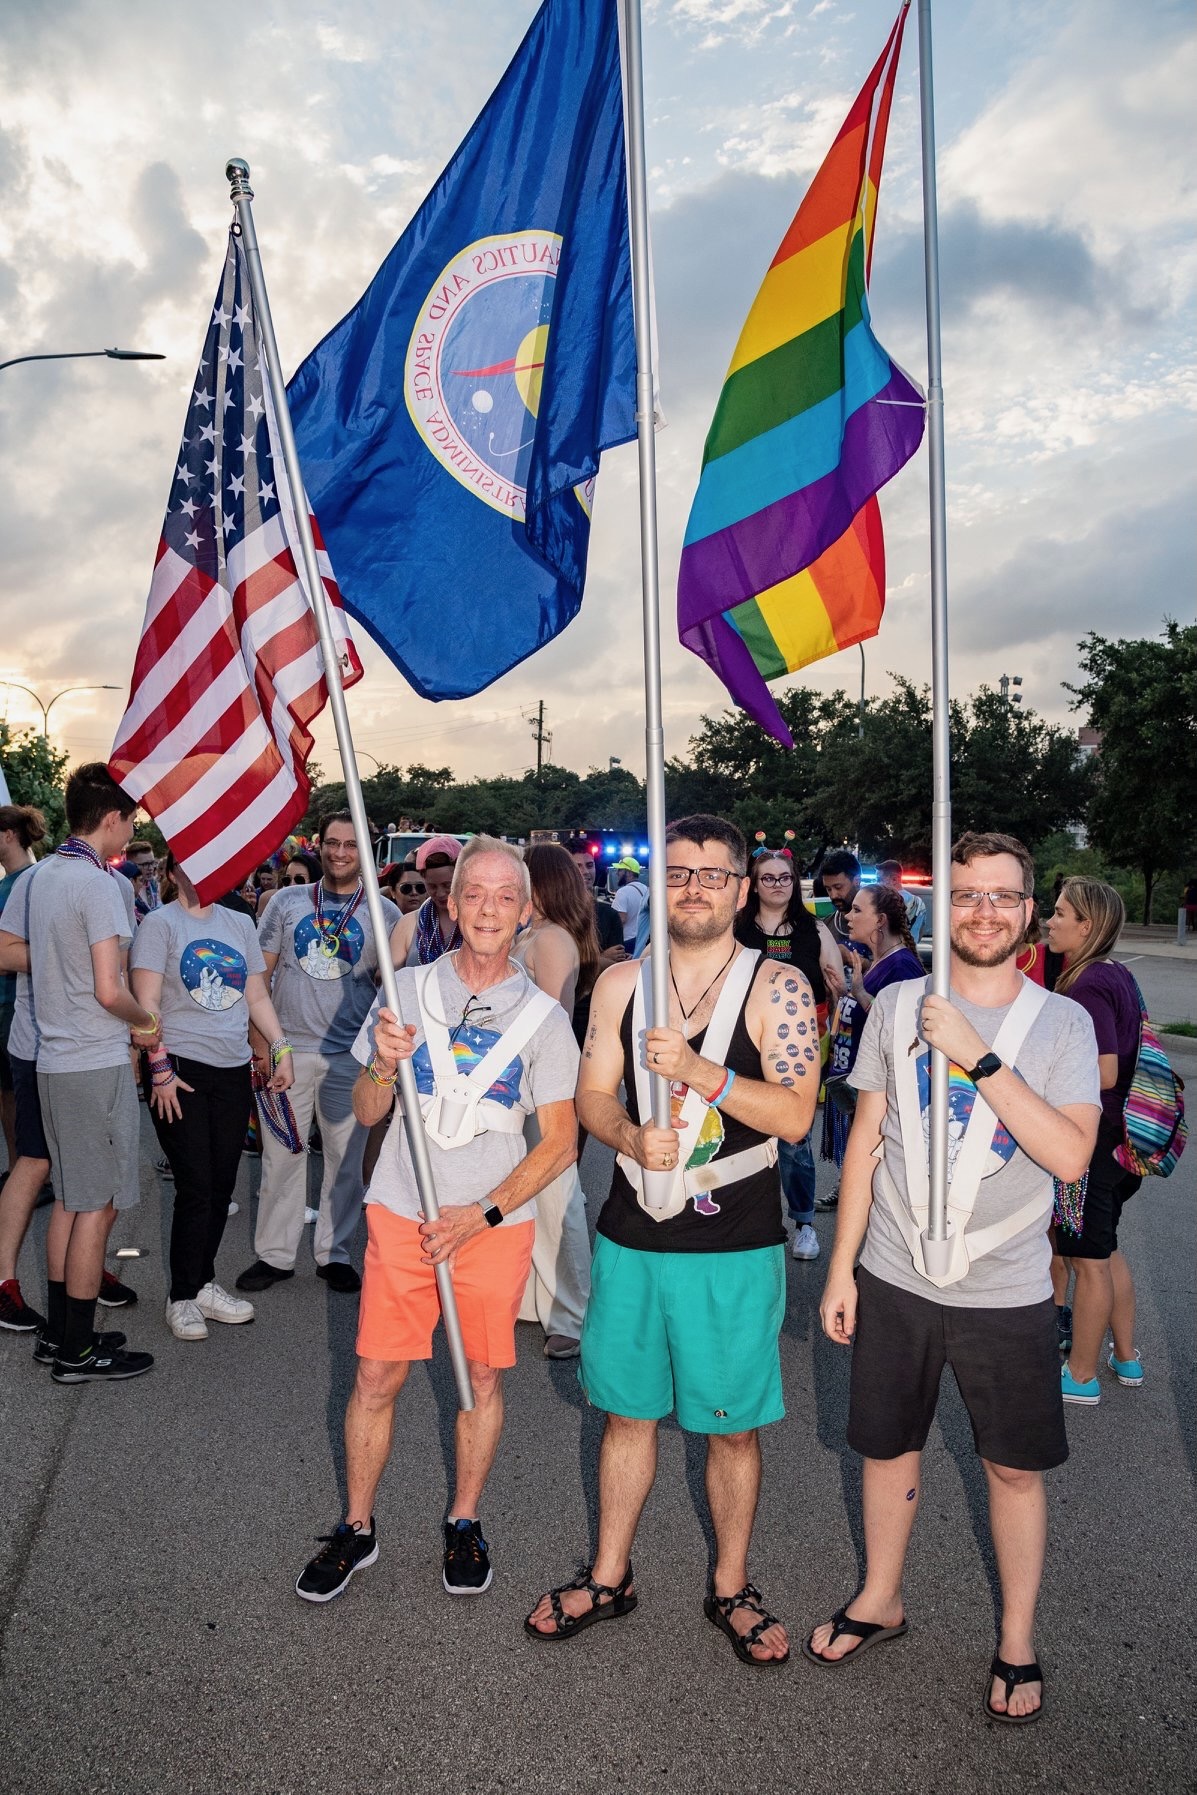 Three men hold a U.S., NASA, and Pride flag as they prepare to march in Houston's annual Pride Parade.